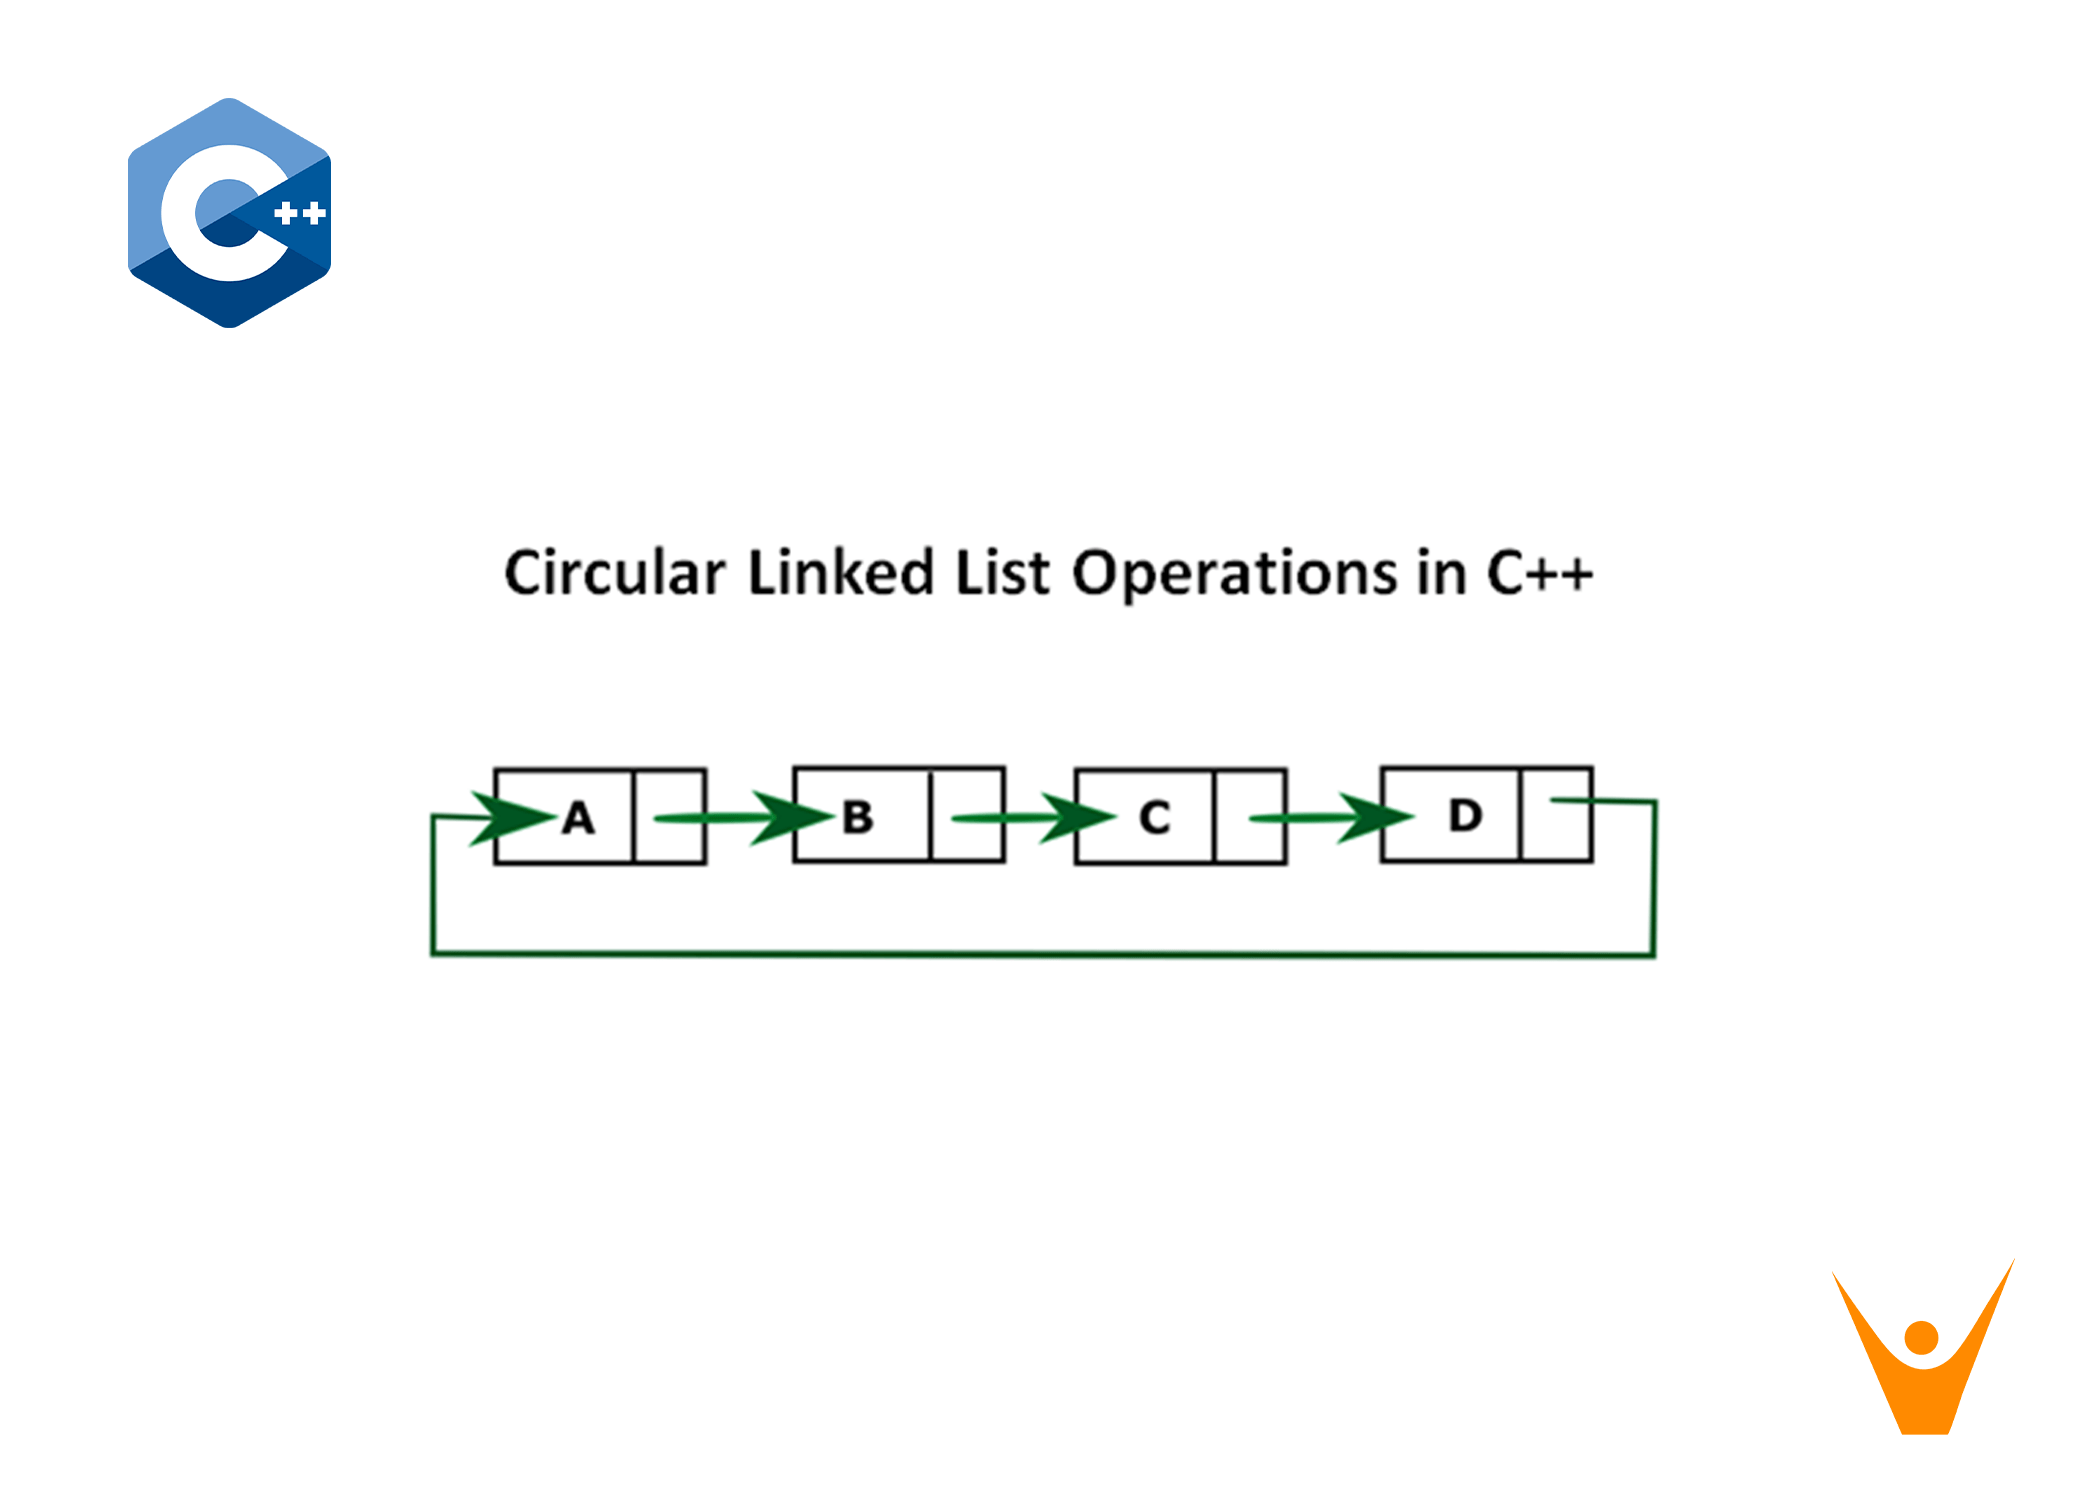 Circular Linked List Implementation in C++ (with code)